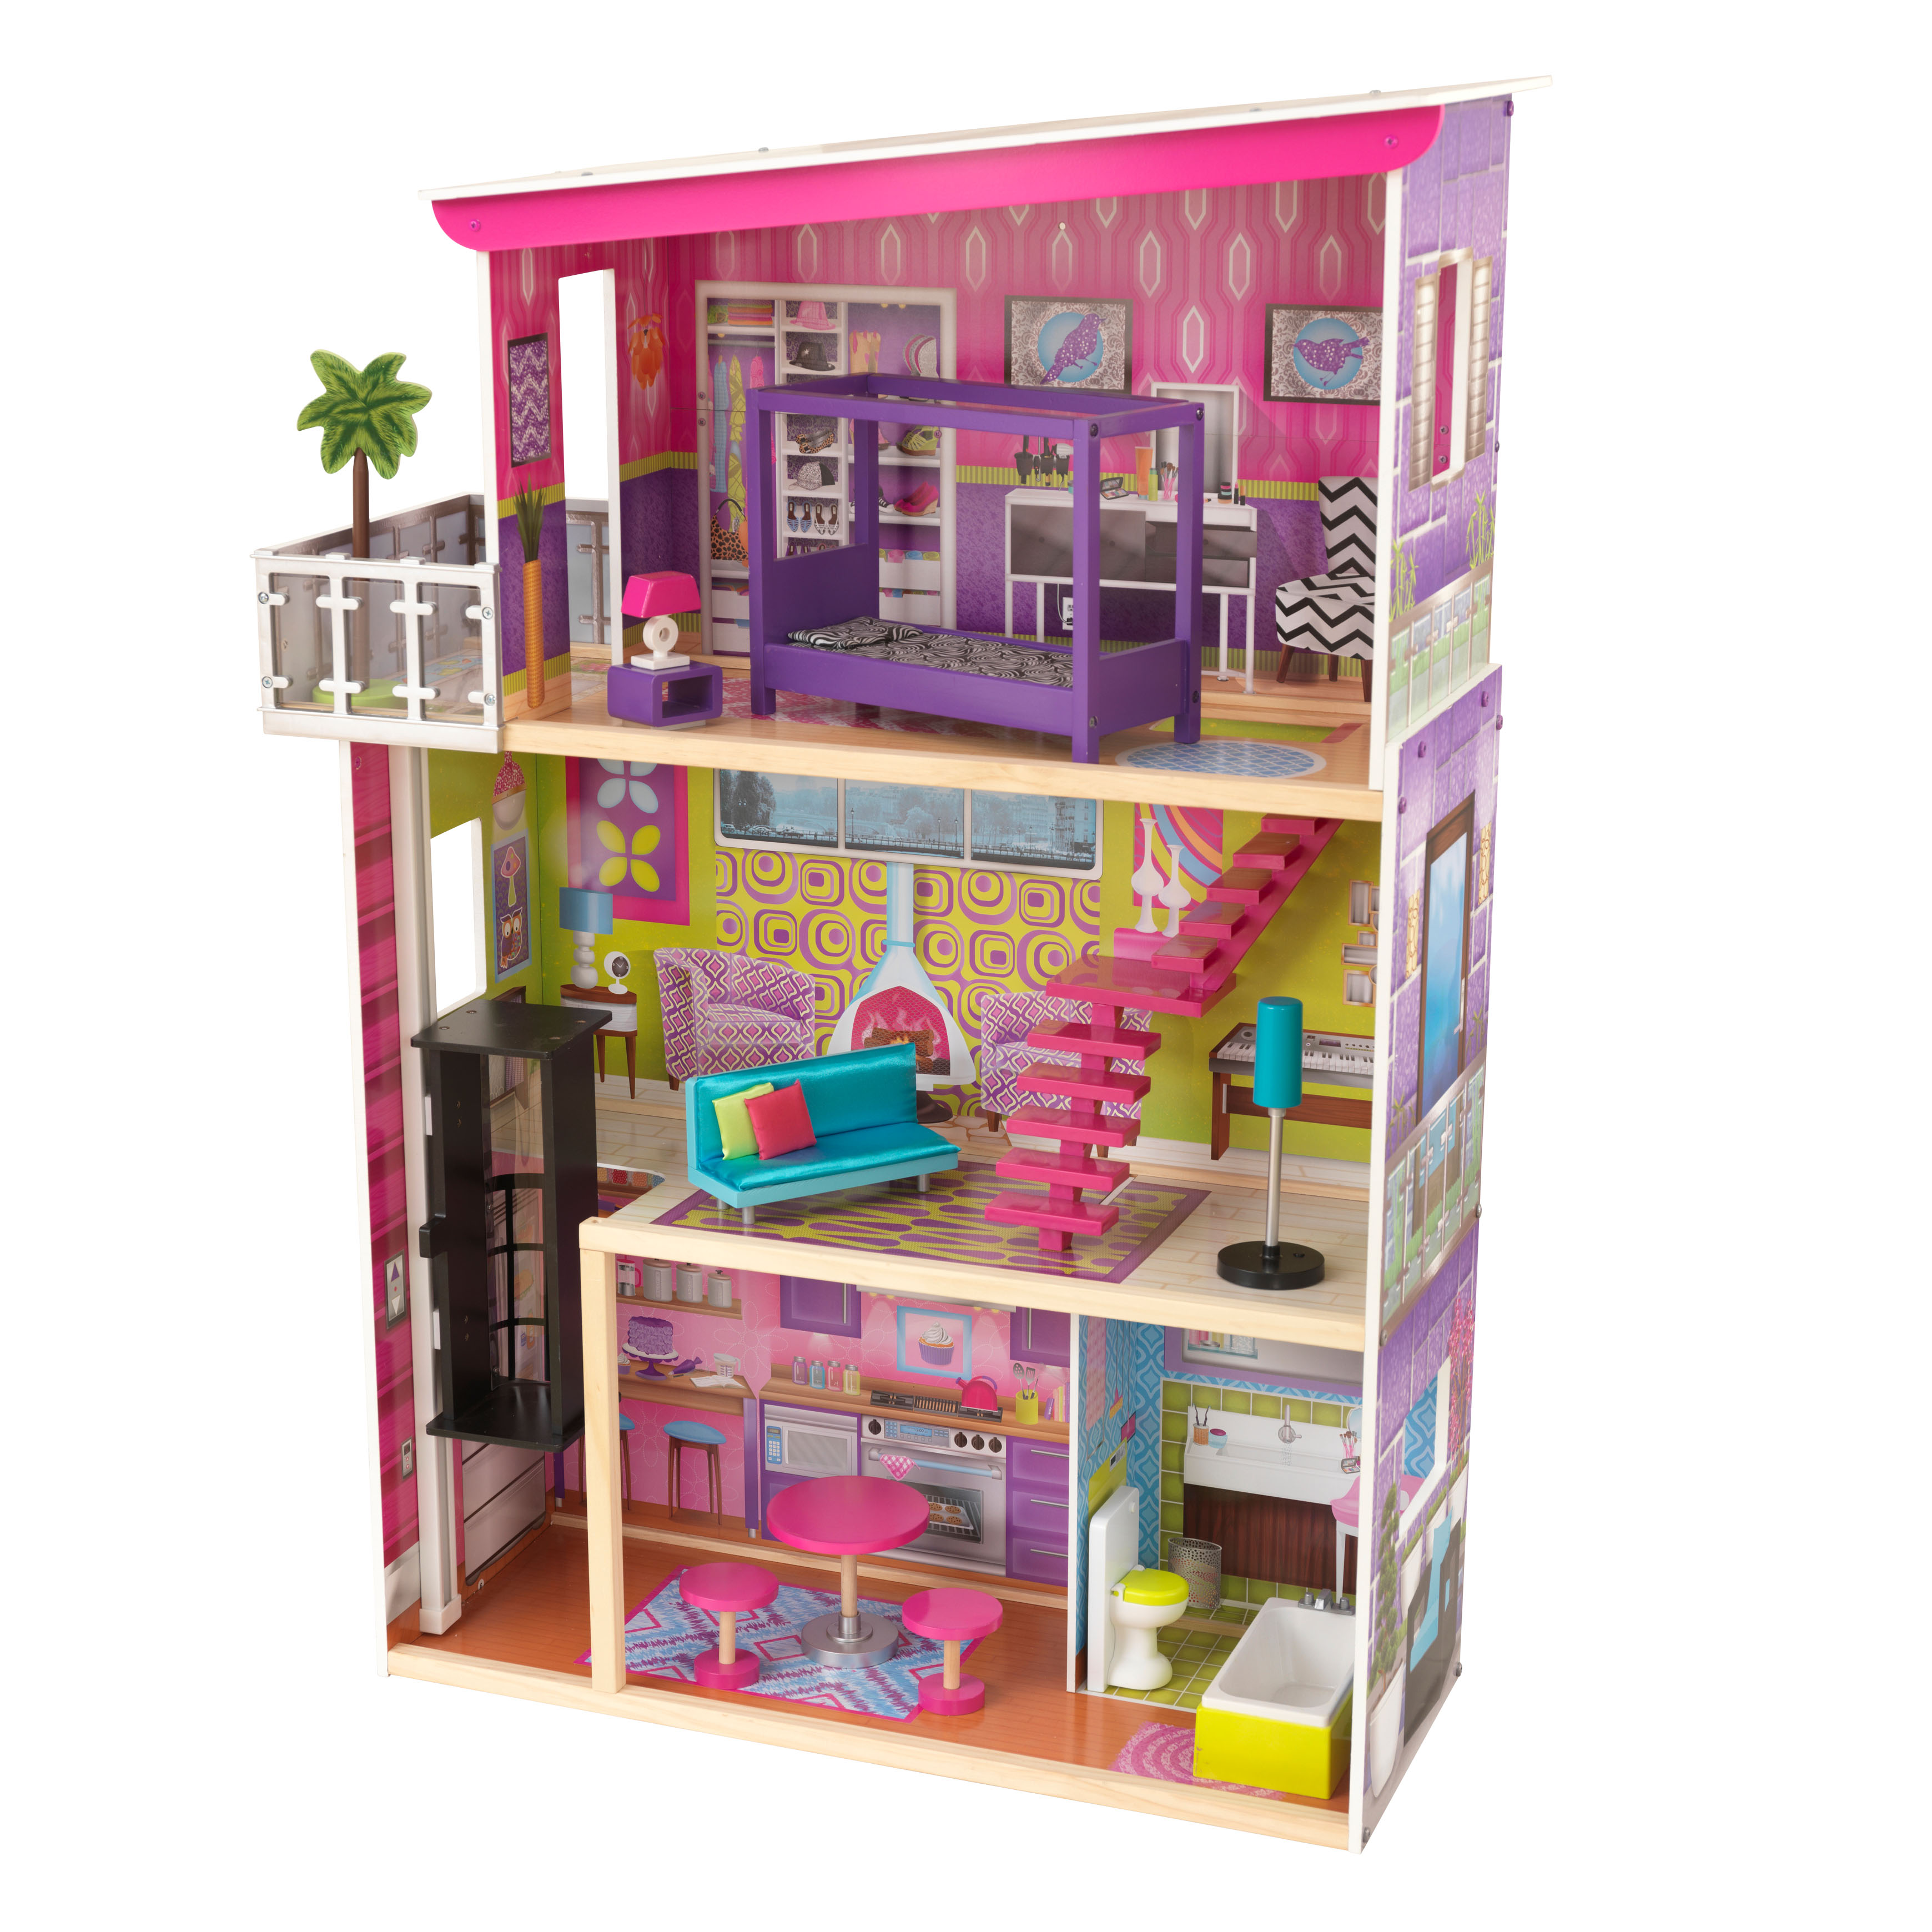 KidKraft Super Model Wooden Dollhouse with Elevator and 11 Accessories, Ages 3 and up - image 4 of 9